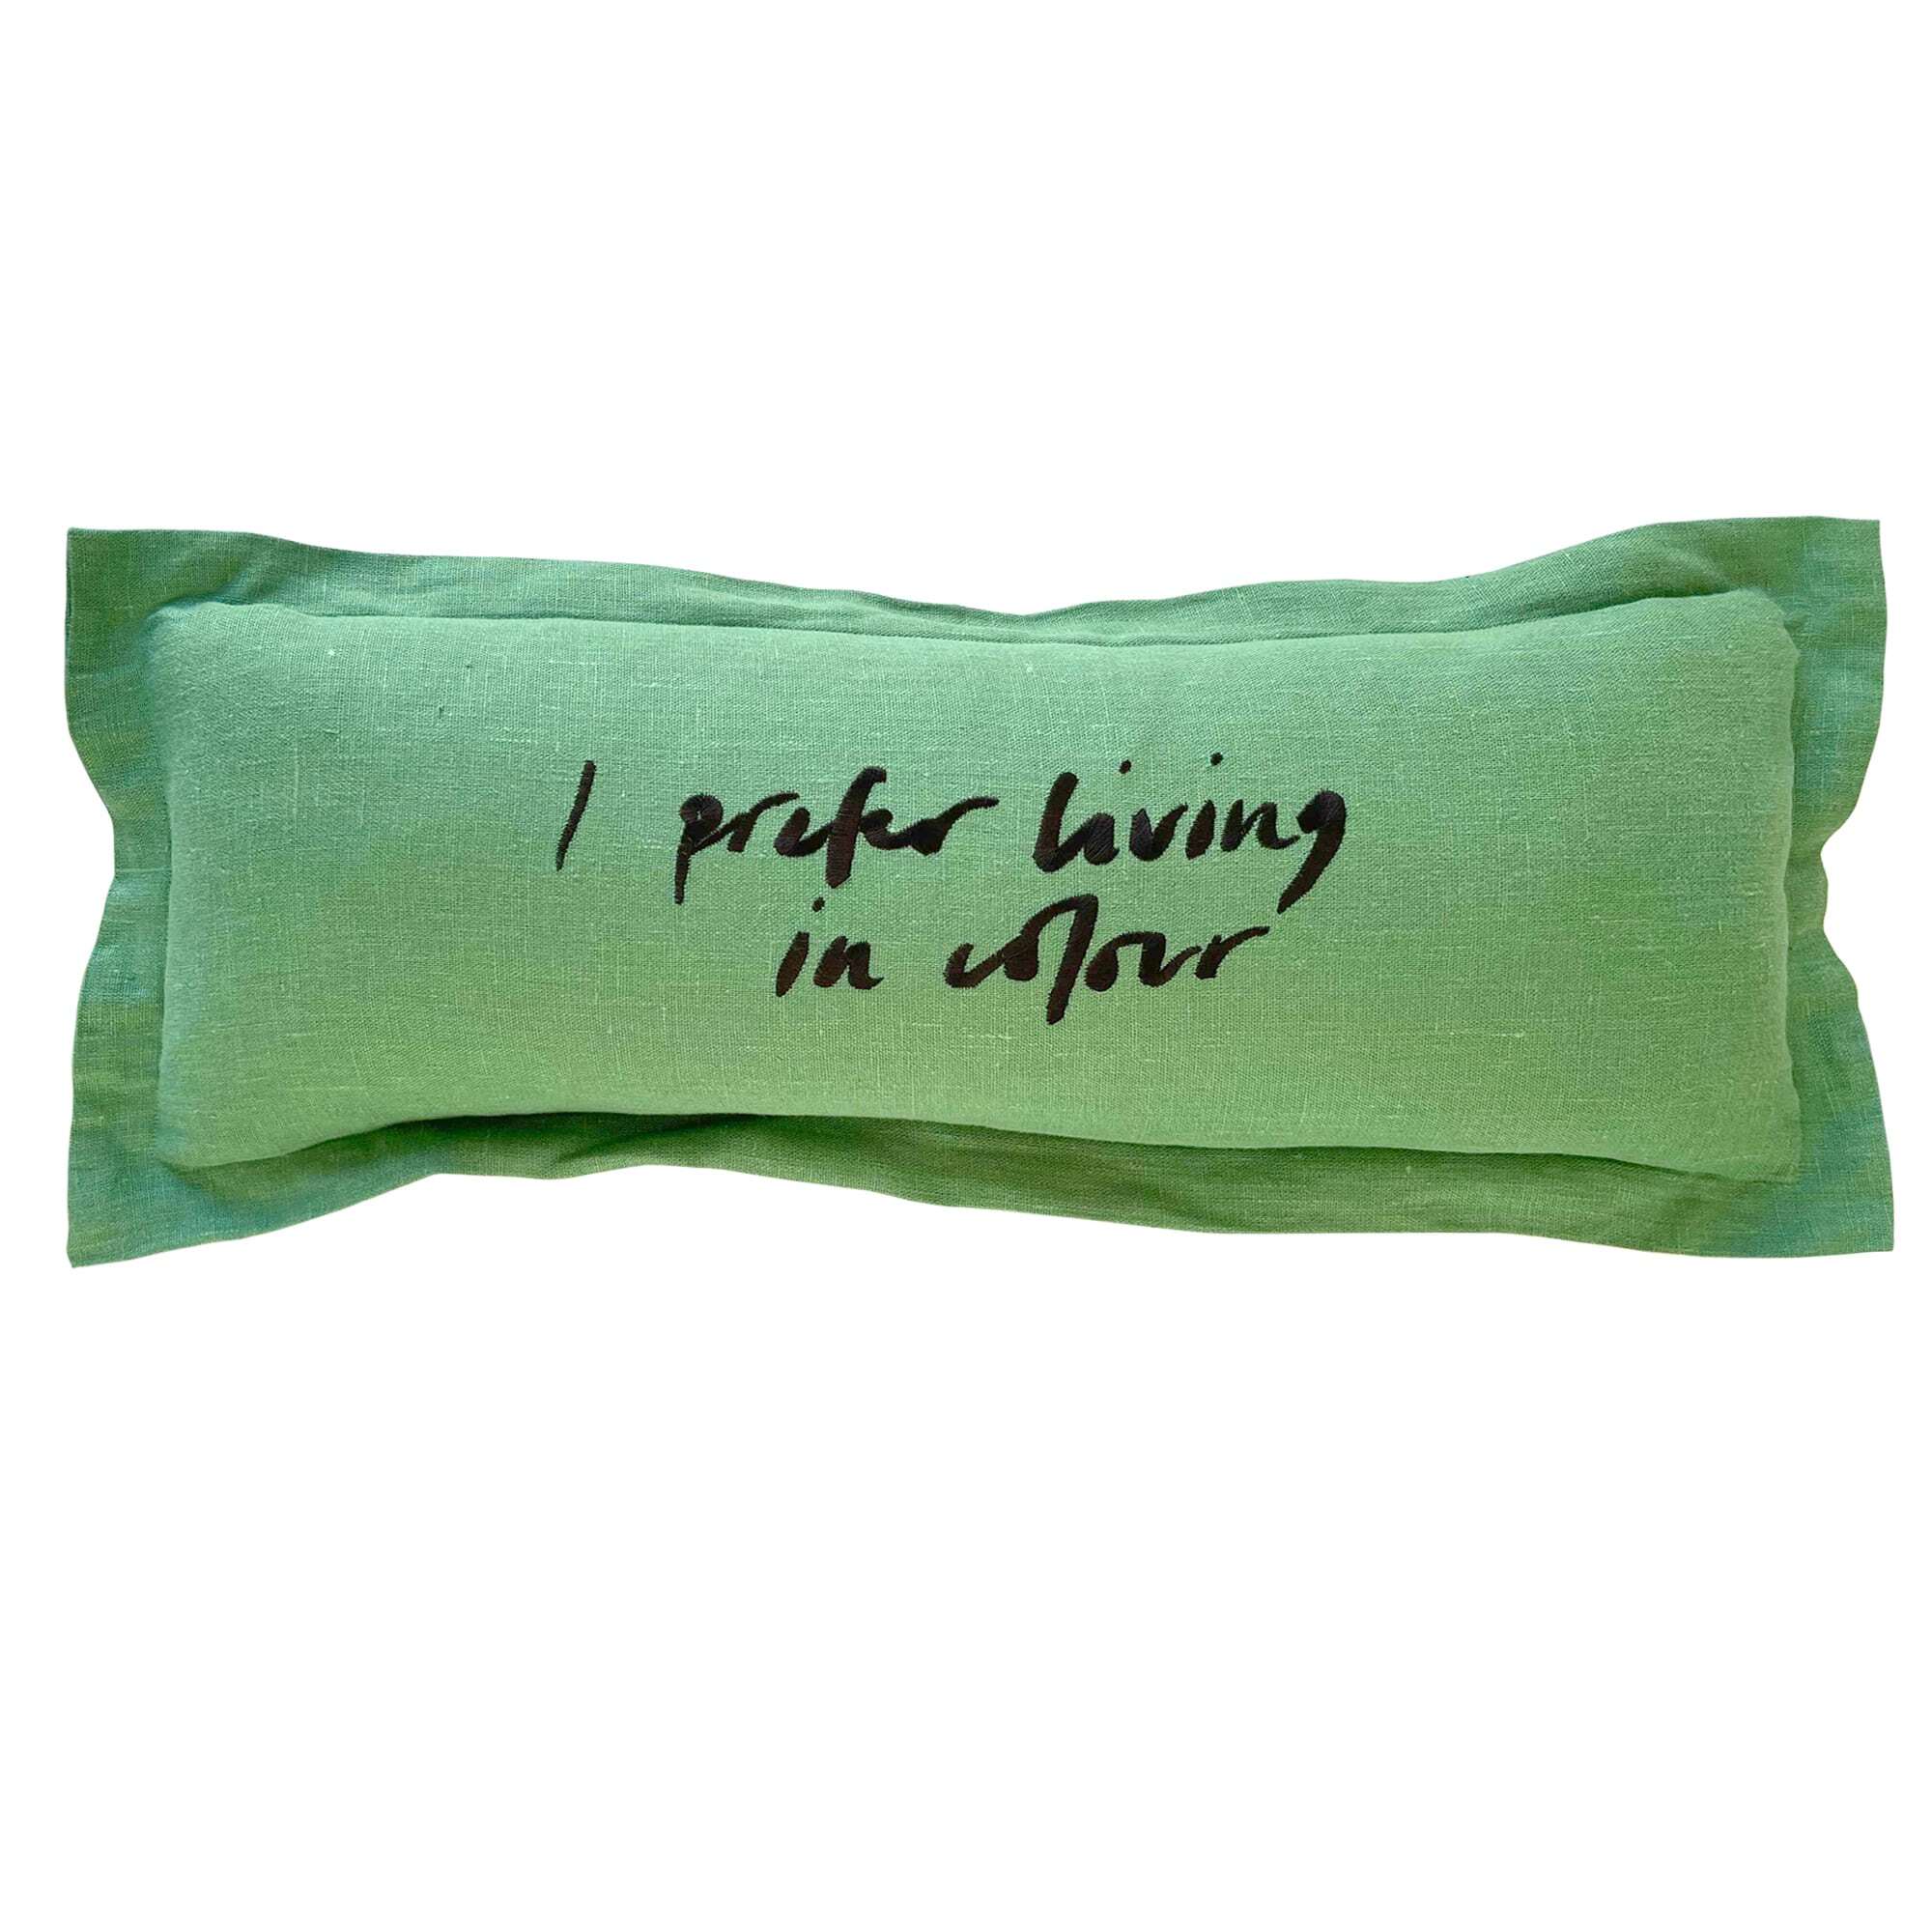 Studio Ashby 'I prefer living in colour' Quote Cushion